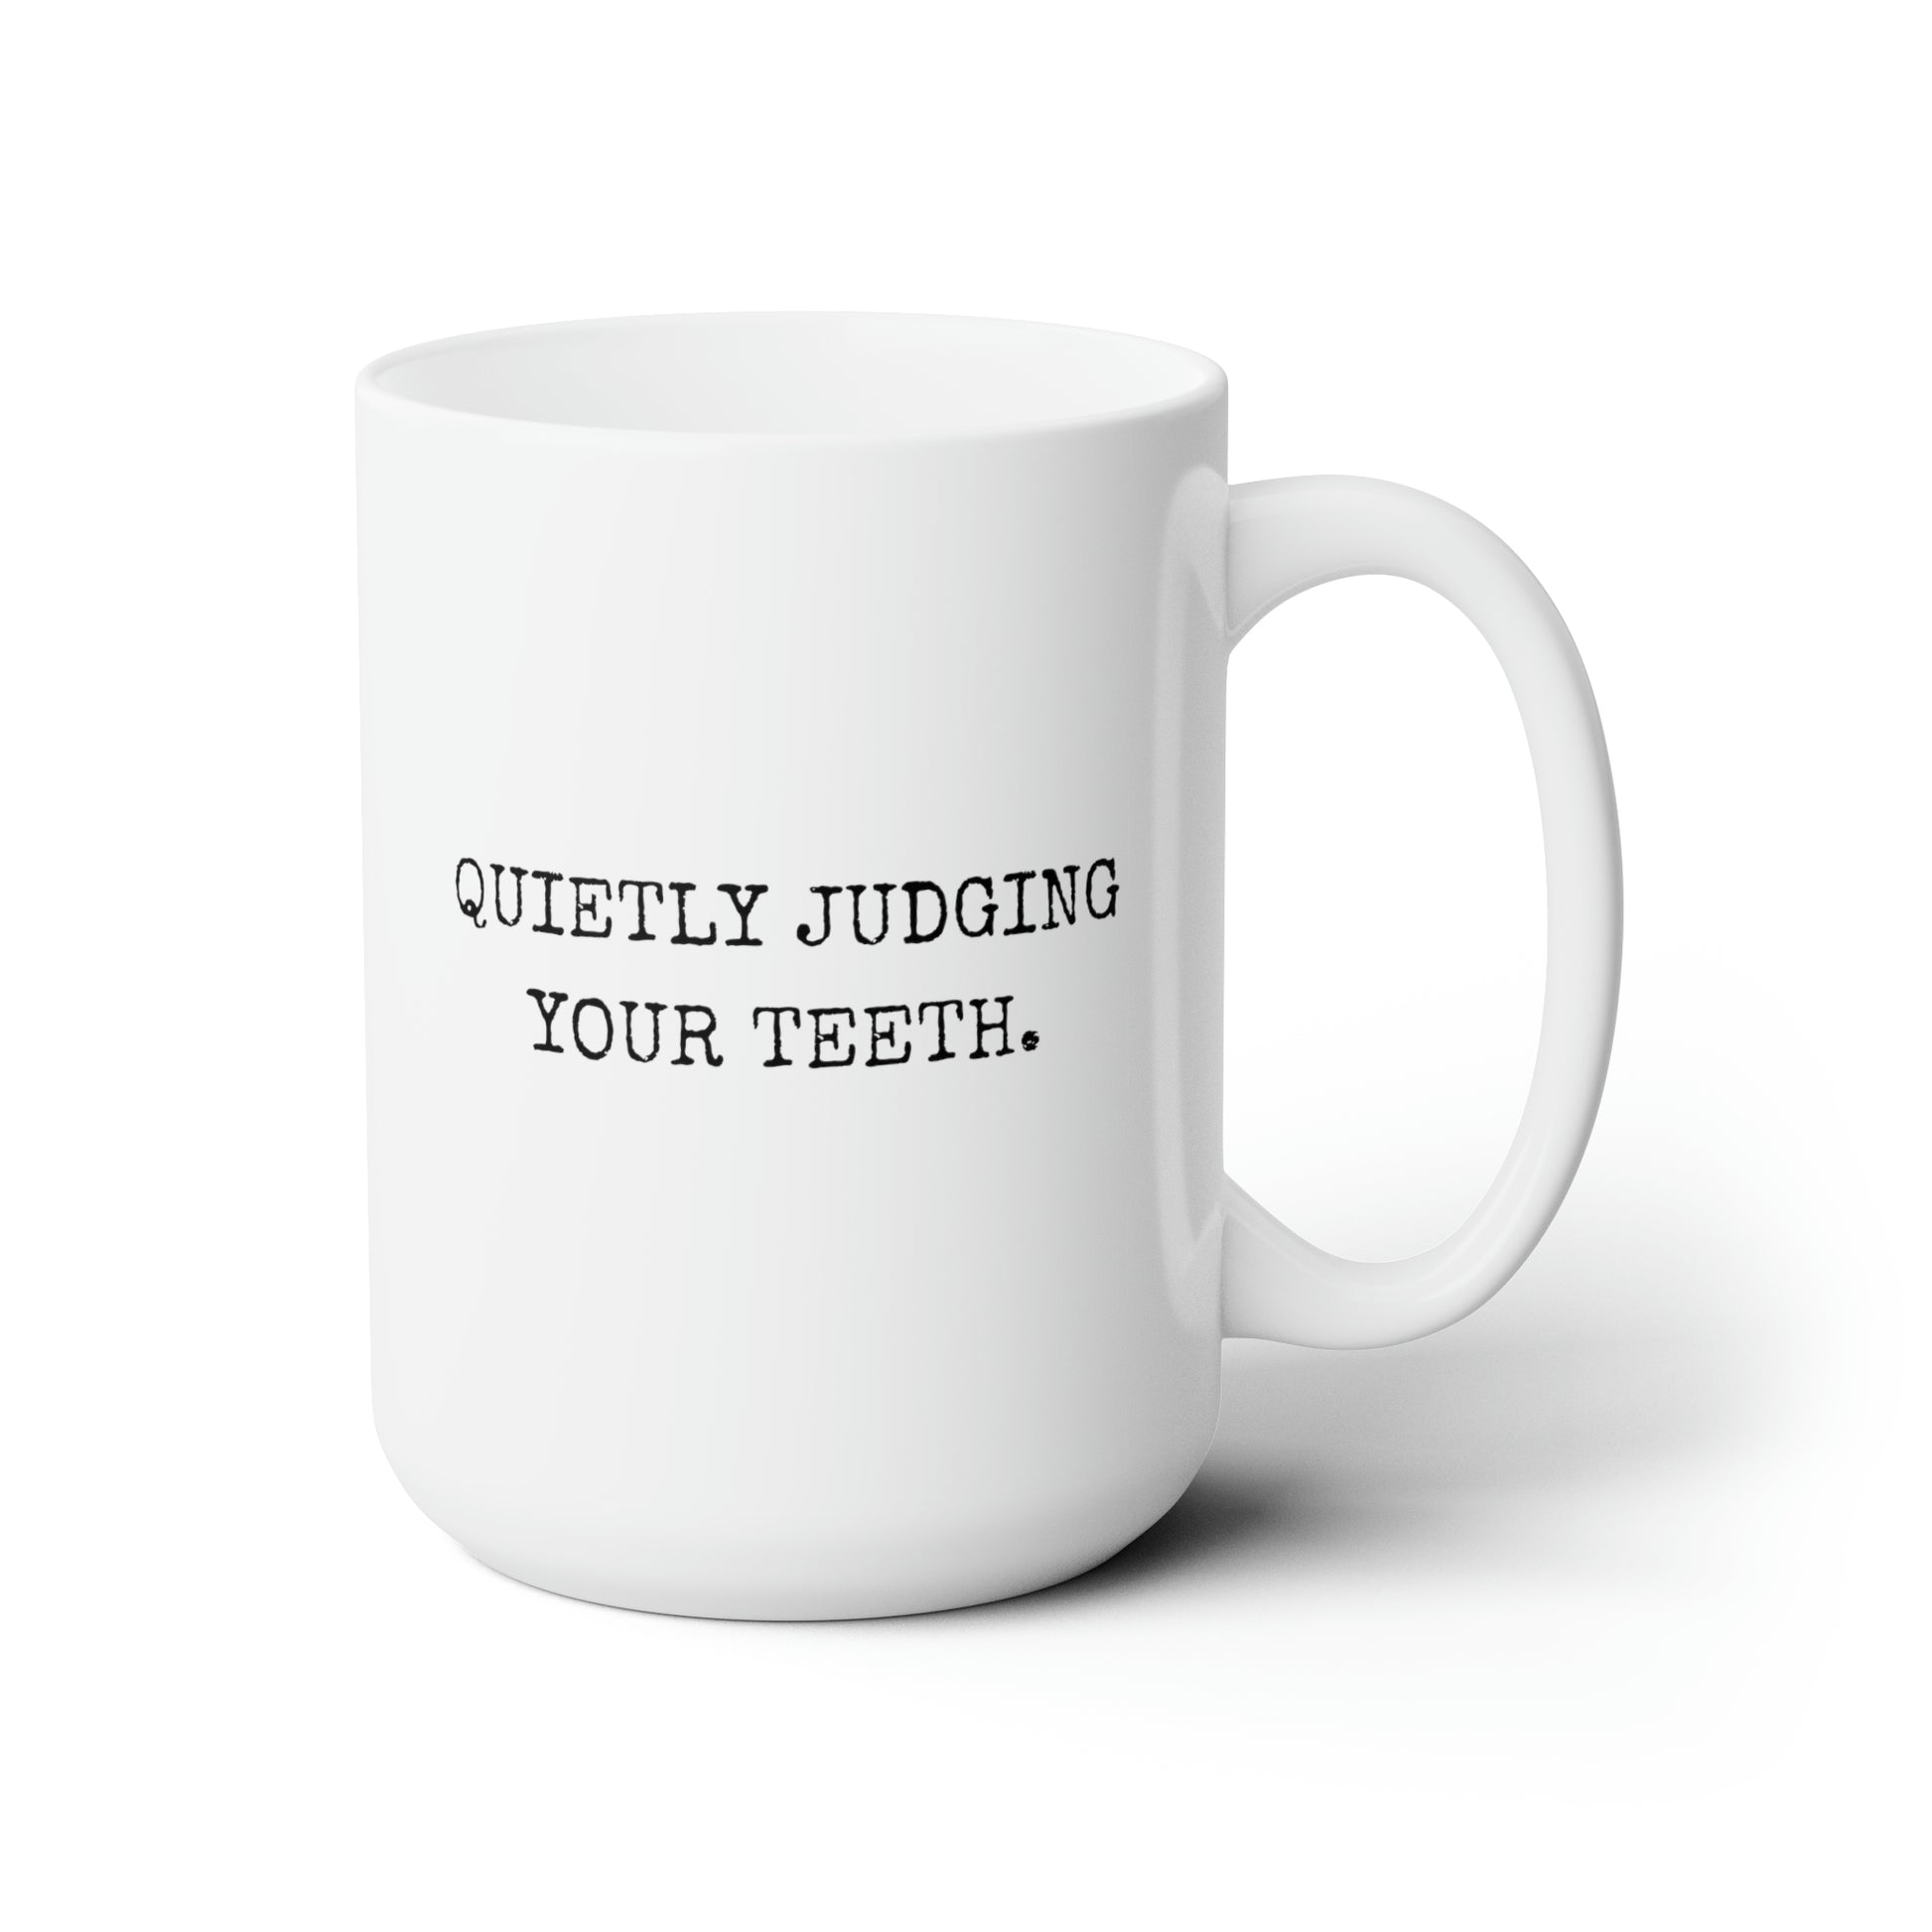 Quietly Judging Your Teeth 15oz white funny large coffee mug gift for dentist dental school graduation assistant orthodontist oral hygienist waveywares wavey wares wavywares wavy wares